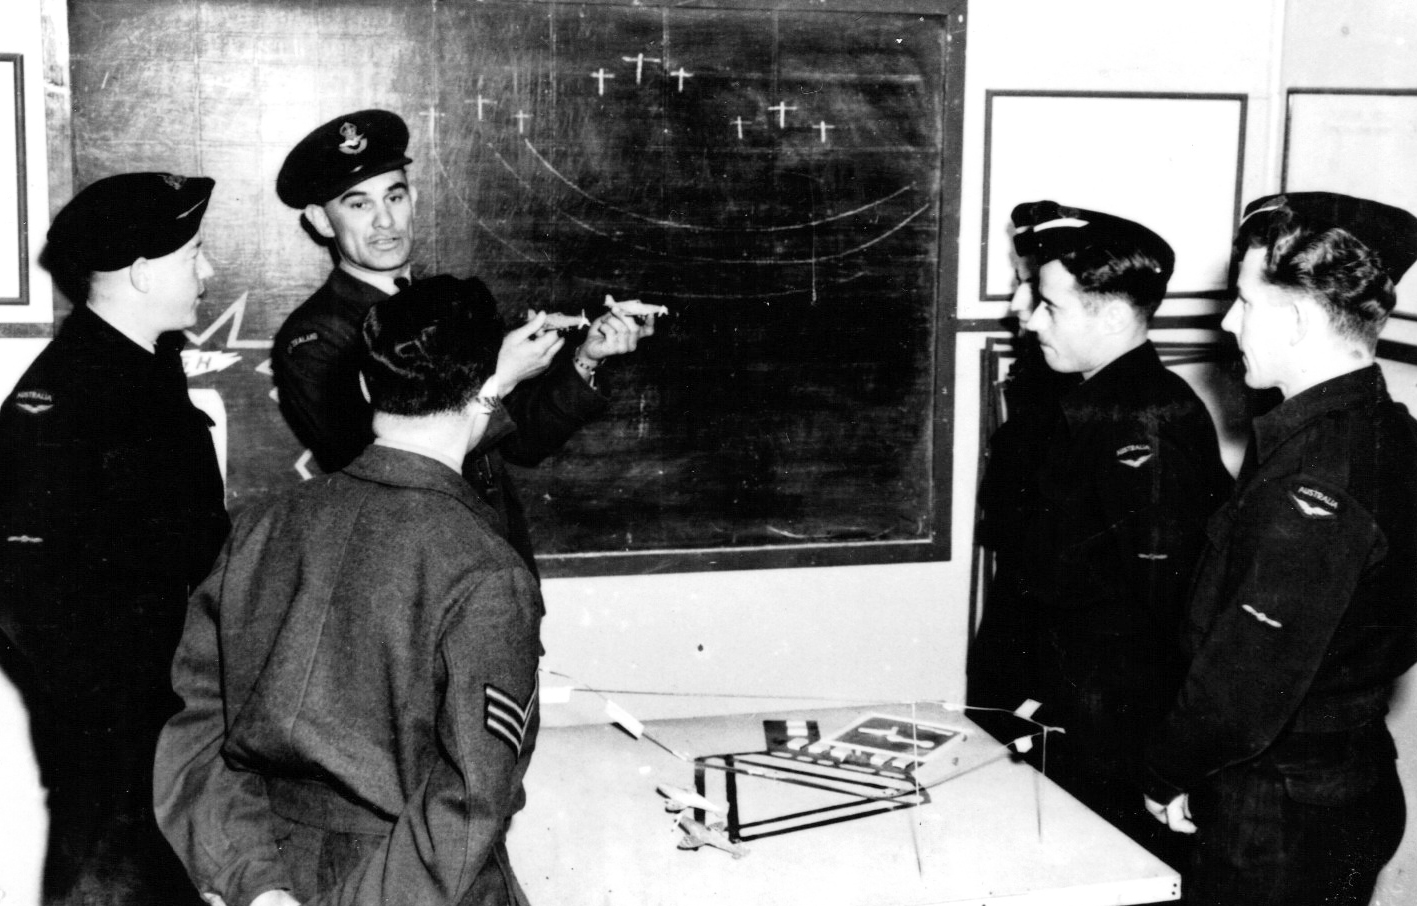 Male instructor holding two model airplanes in front of 5 students in airforce uniforms